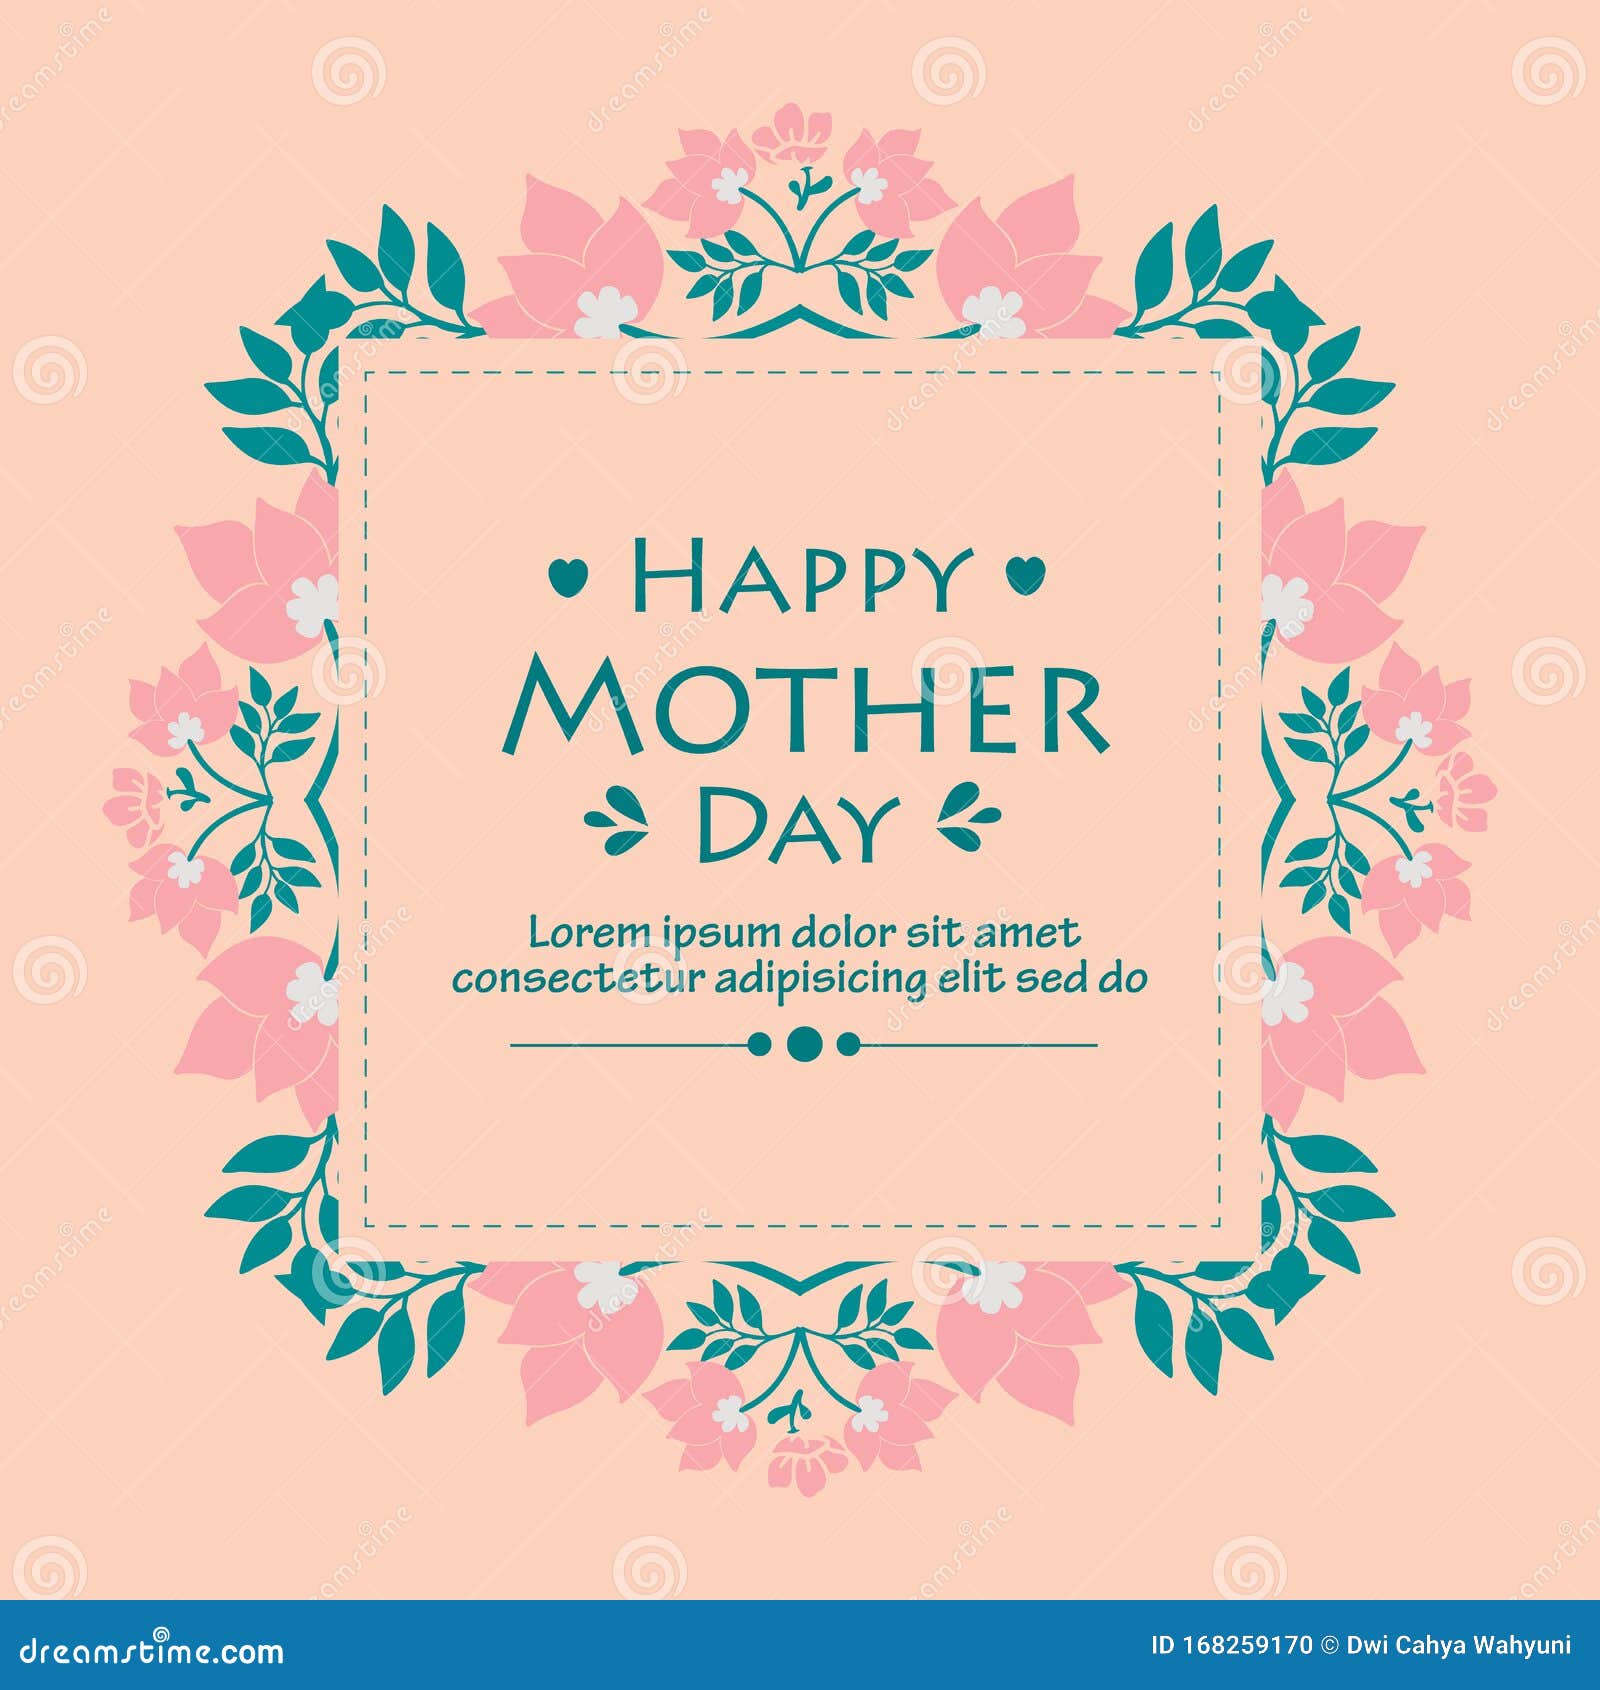 100 Happy Mothers Day Images and Wallpapers 2022  QuotesSquare